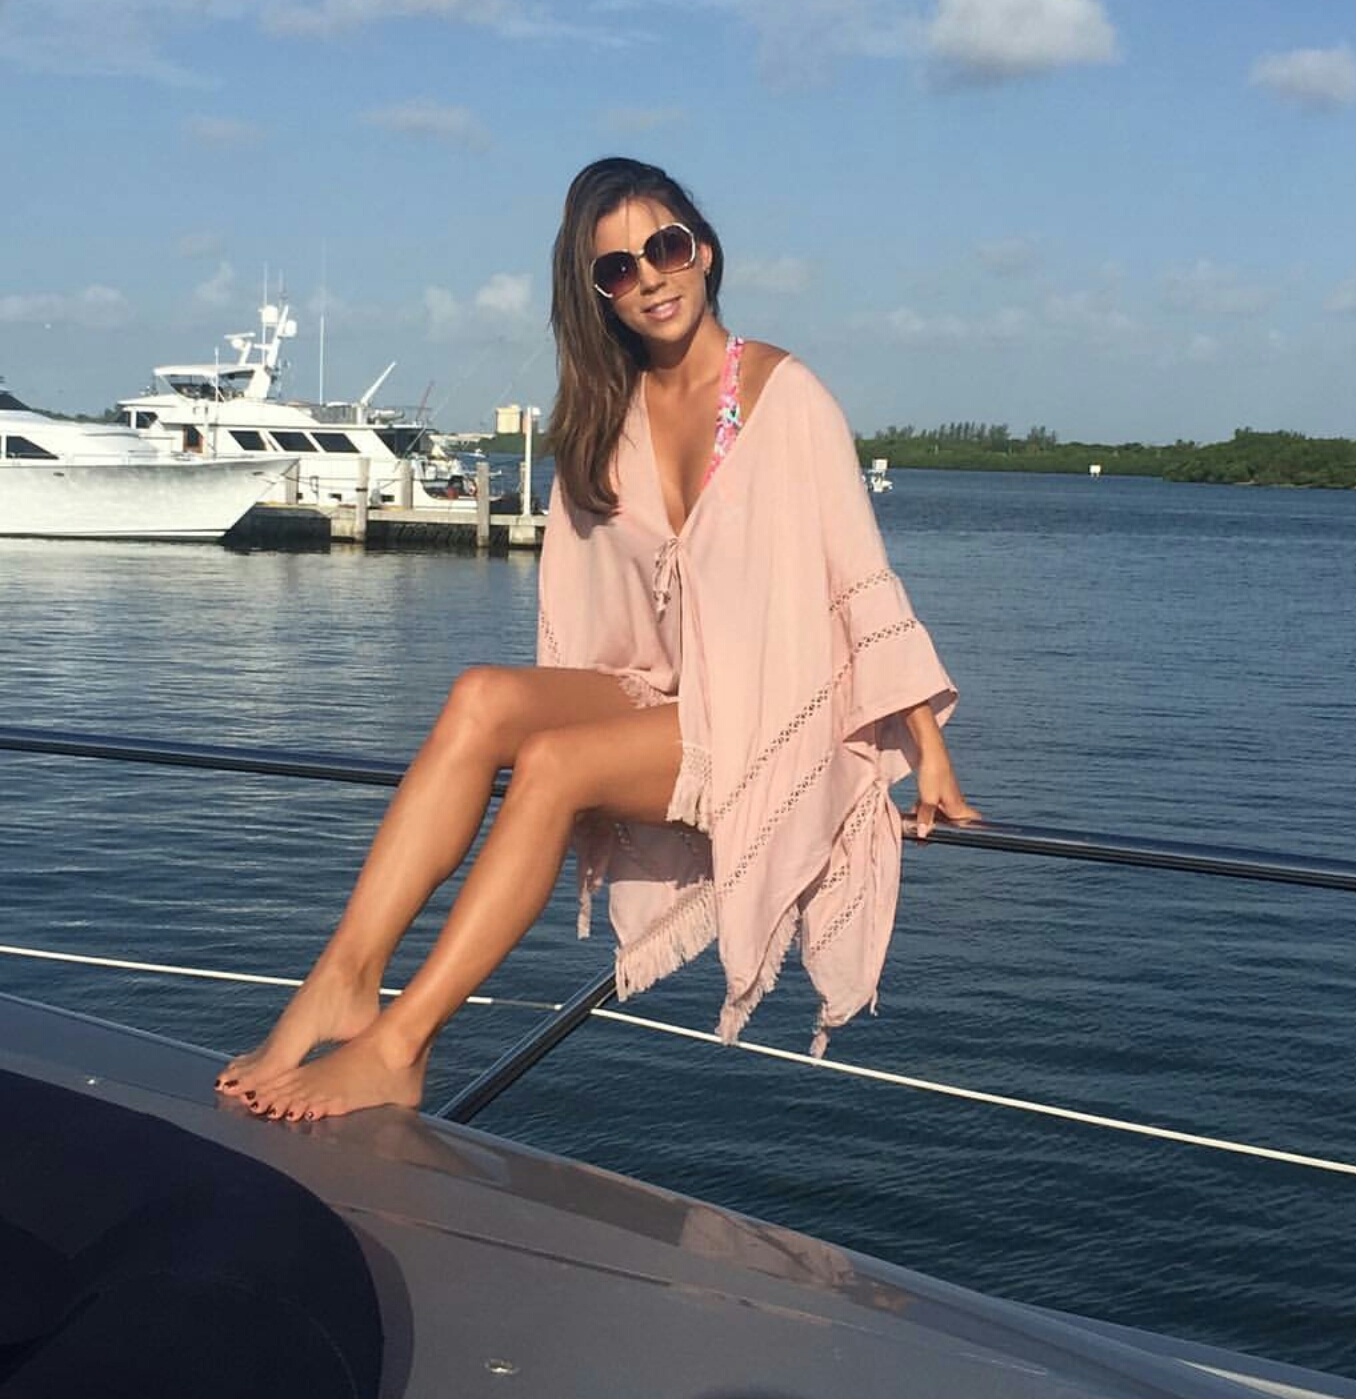 People who liked Ximena Duque's feet, also liked.